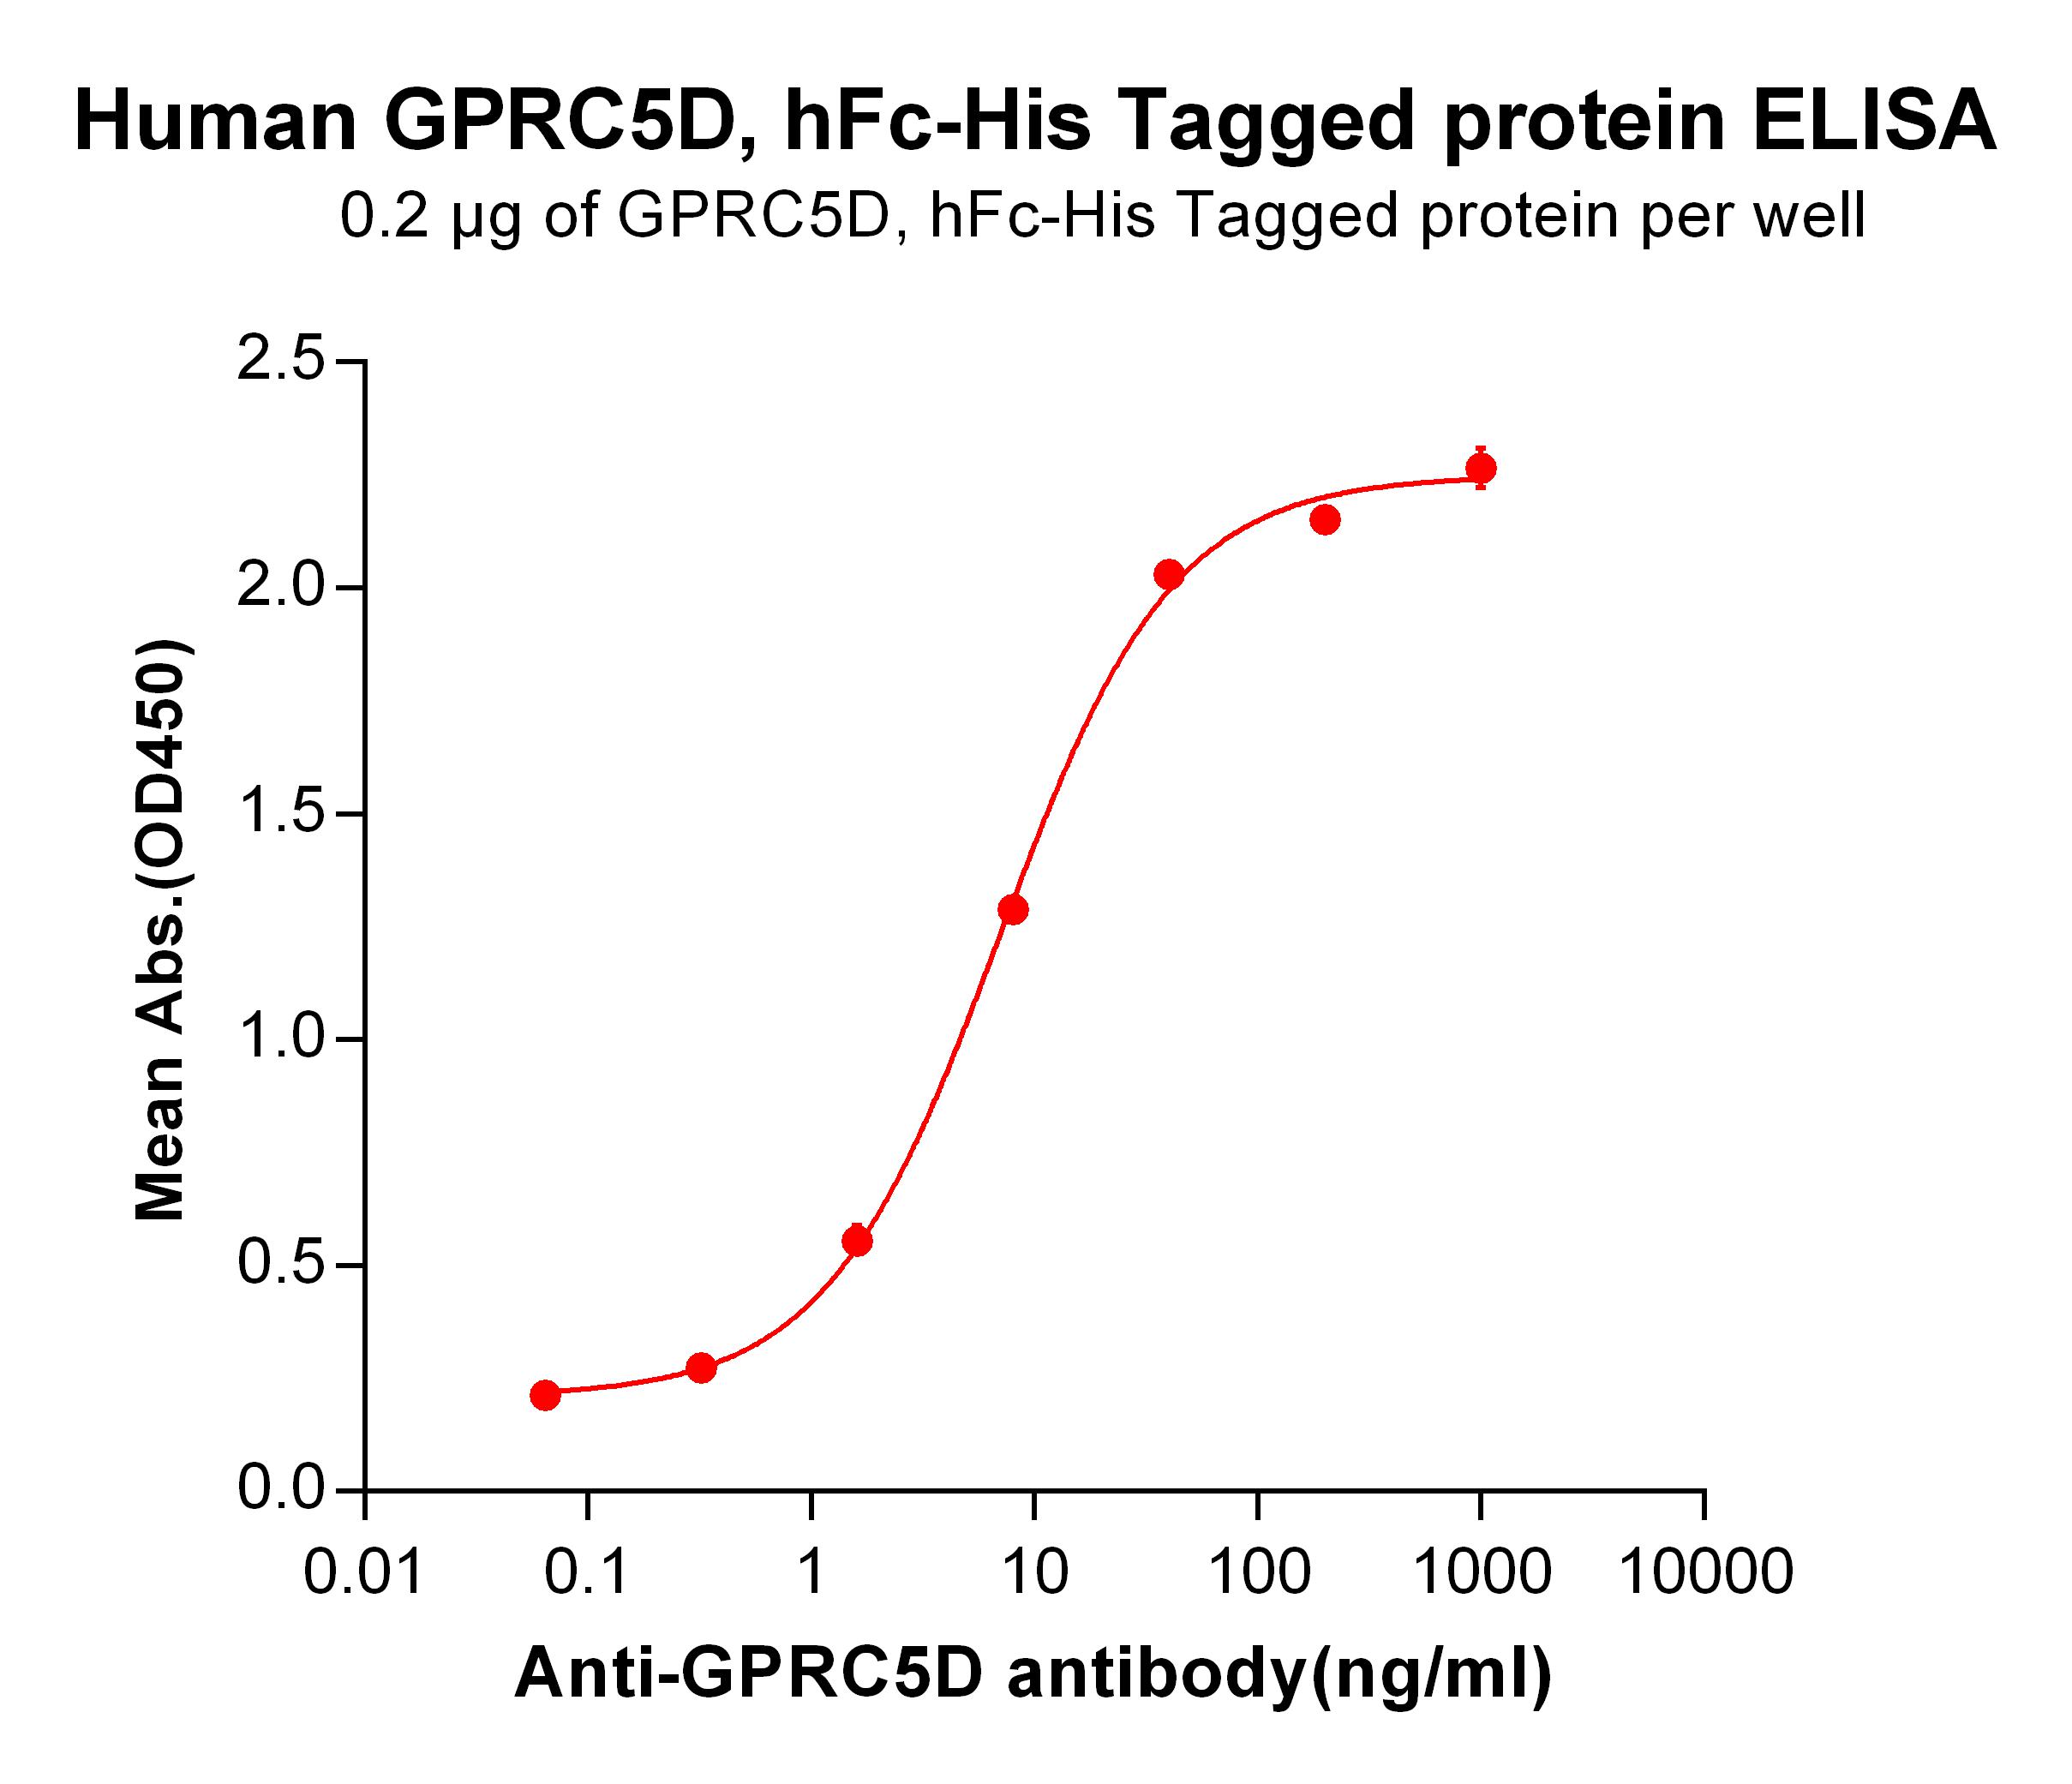 Recombinant human GPRC5D protein with C-terminal human Fc and 6×His tag